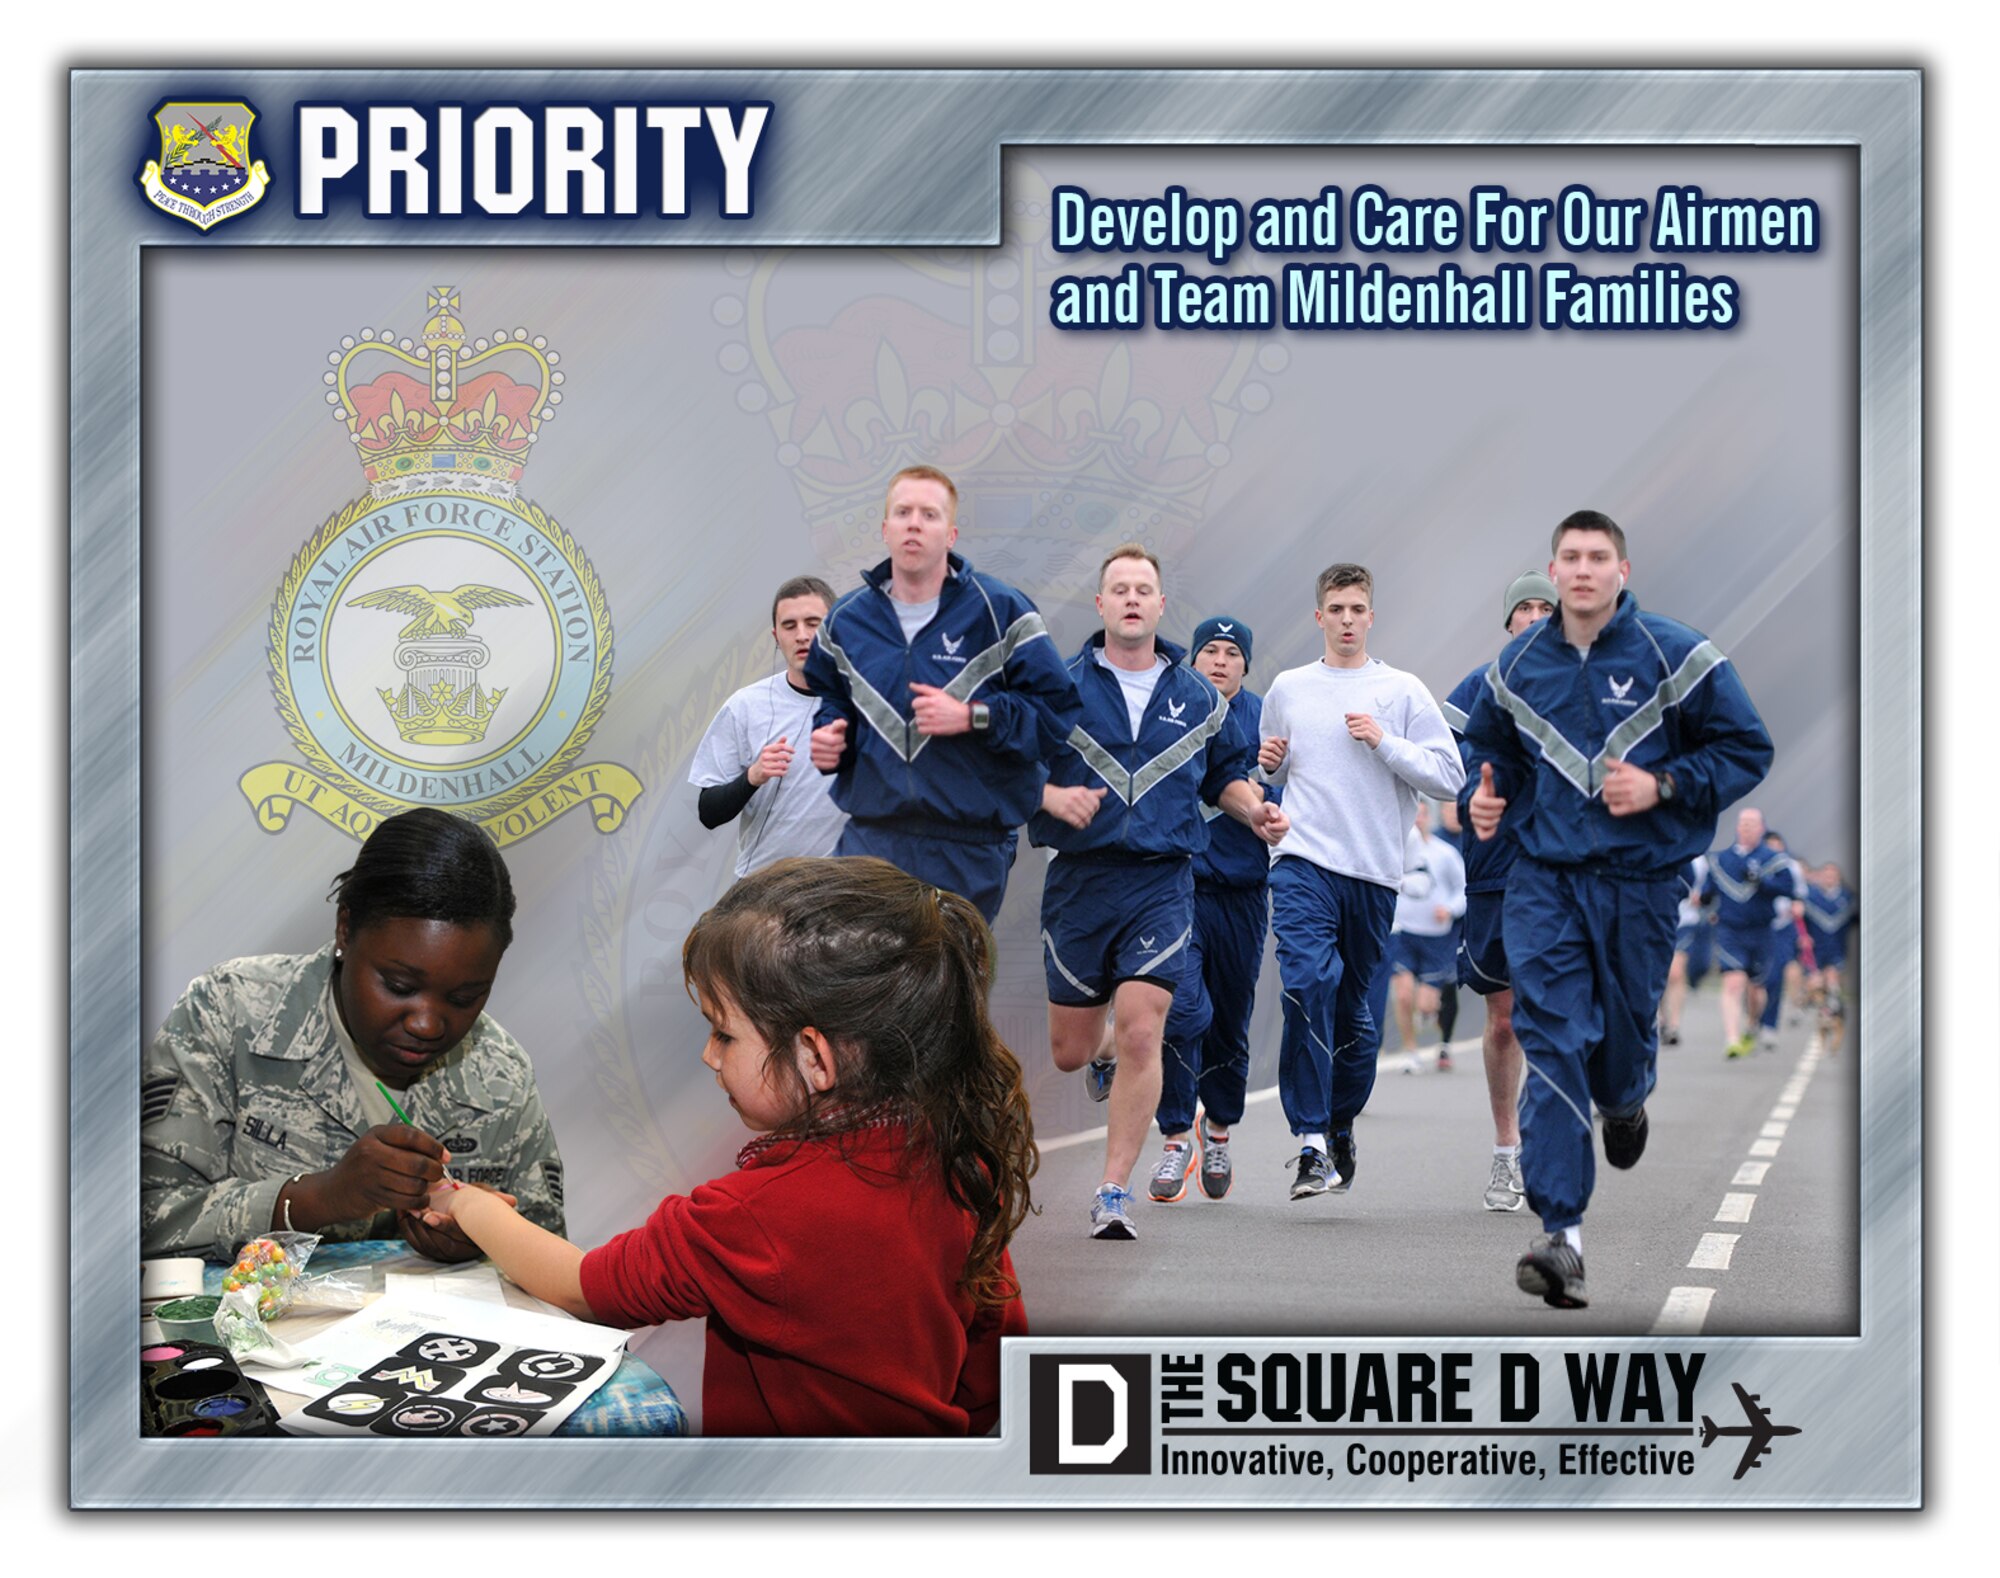 One of the 100th Air Refueling Wing's four priorities is people - develop and care for our Airmen and Team Mildenhall families. The 100th ARW is located on RAF Mildenhall, England. (U.S. Air Force graphic by Gary Rogers/Released)